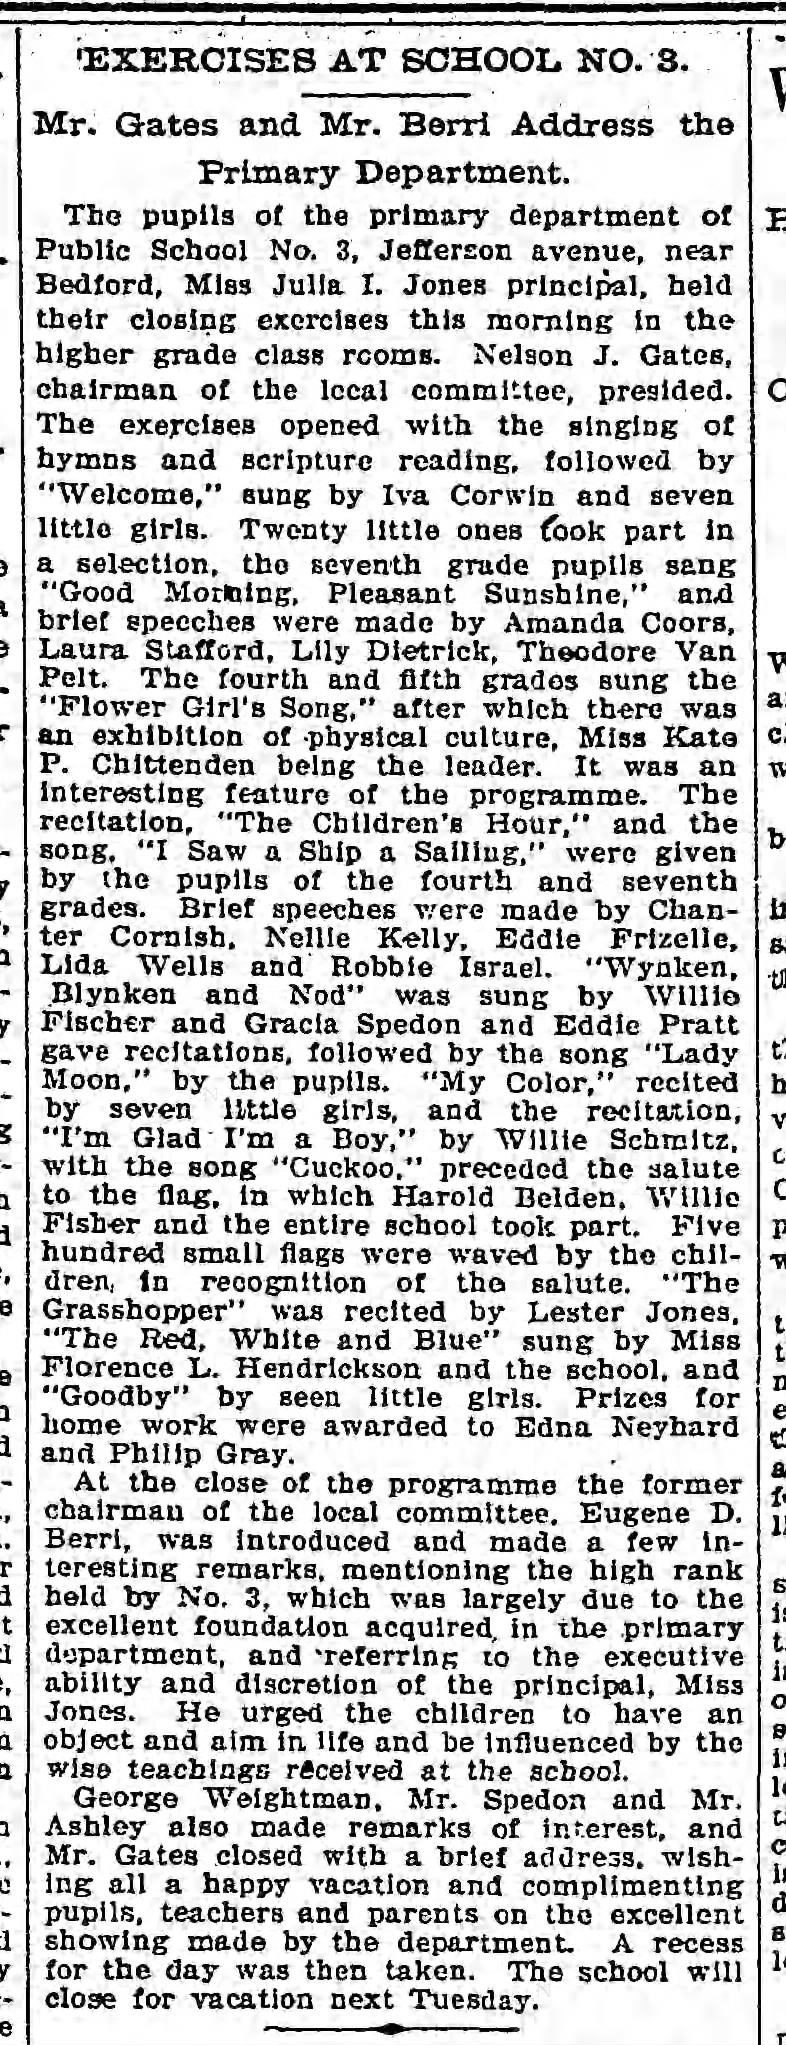 My grandmother, Iva Corwin, sang and this article mentions her Brooklyn school.